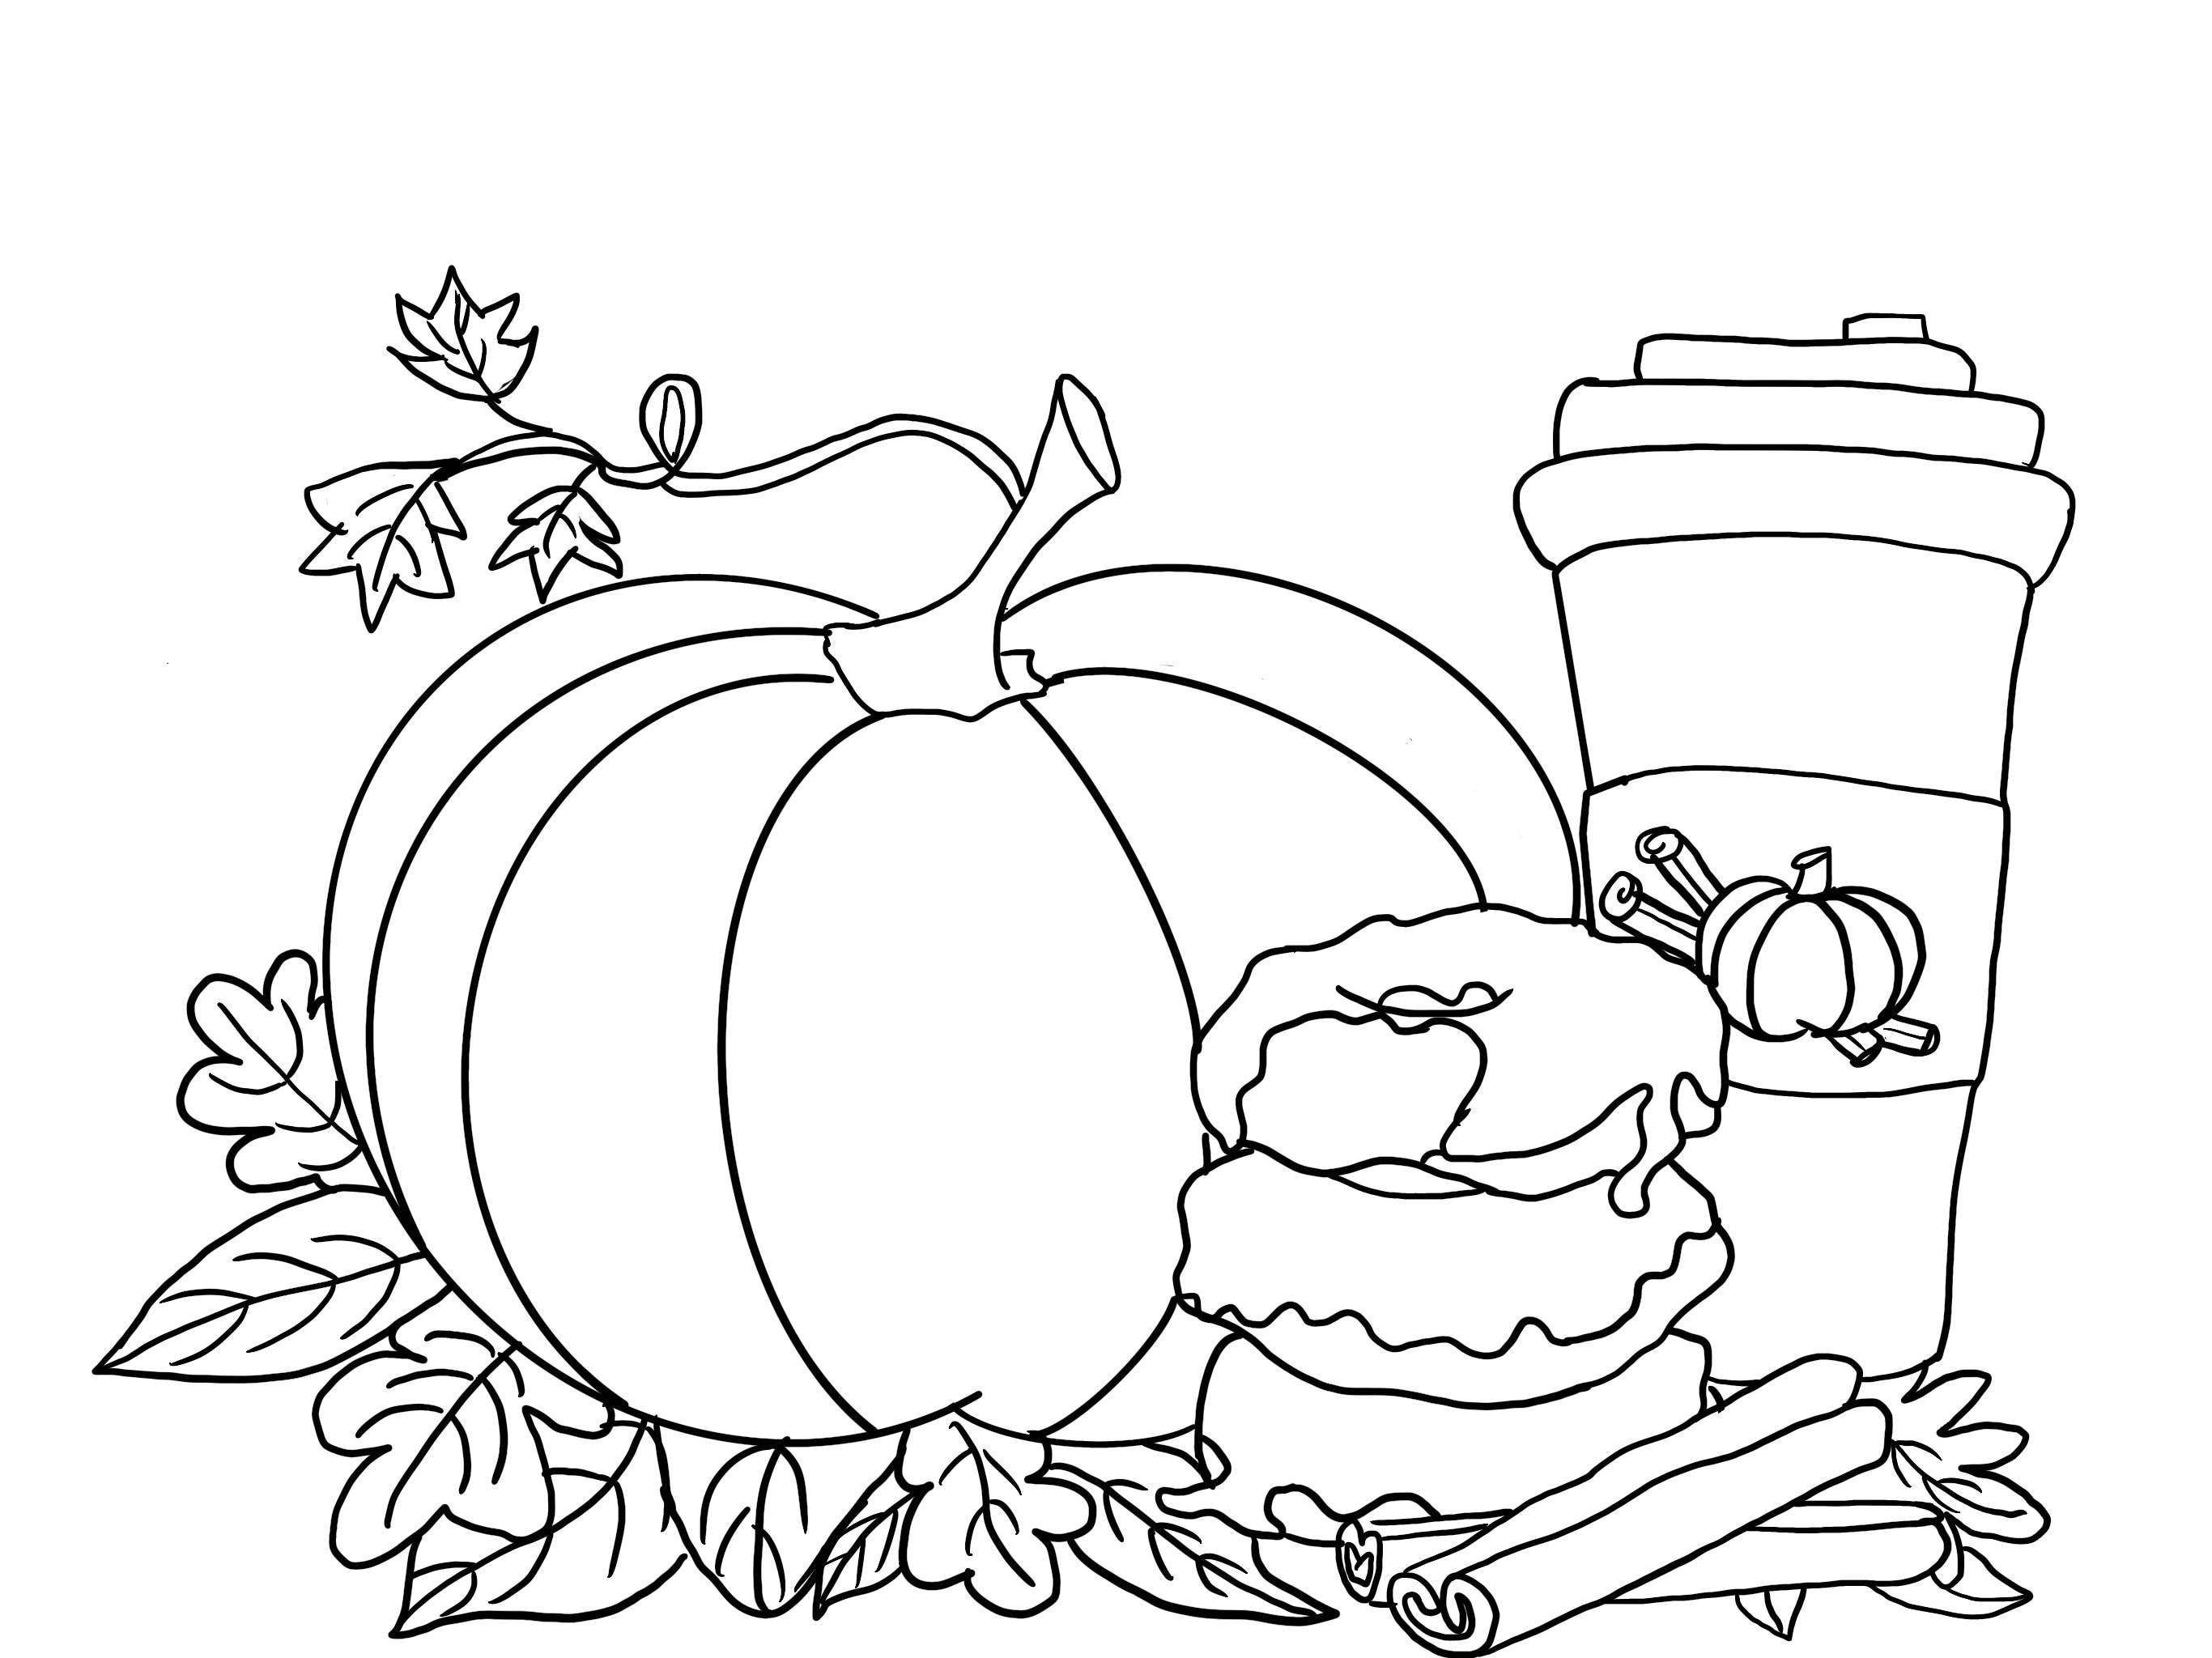 Pumpkin spice coffee donuts coloring page